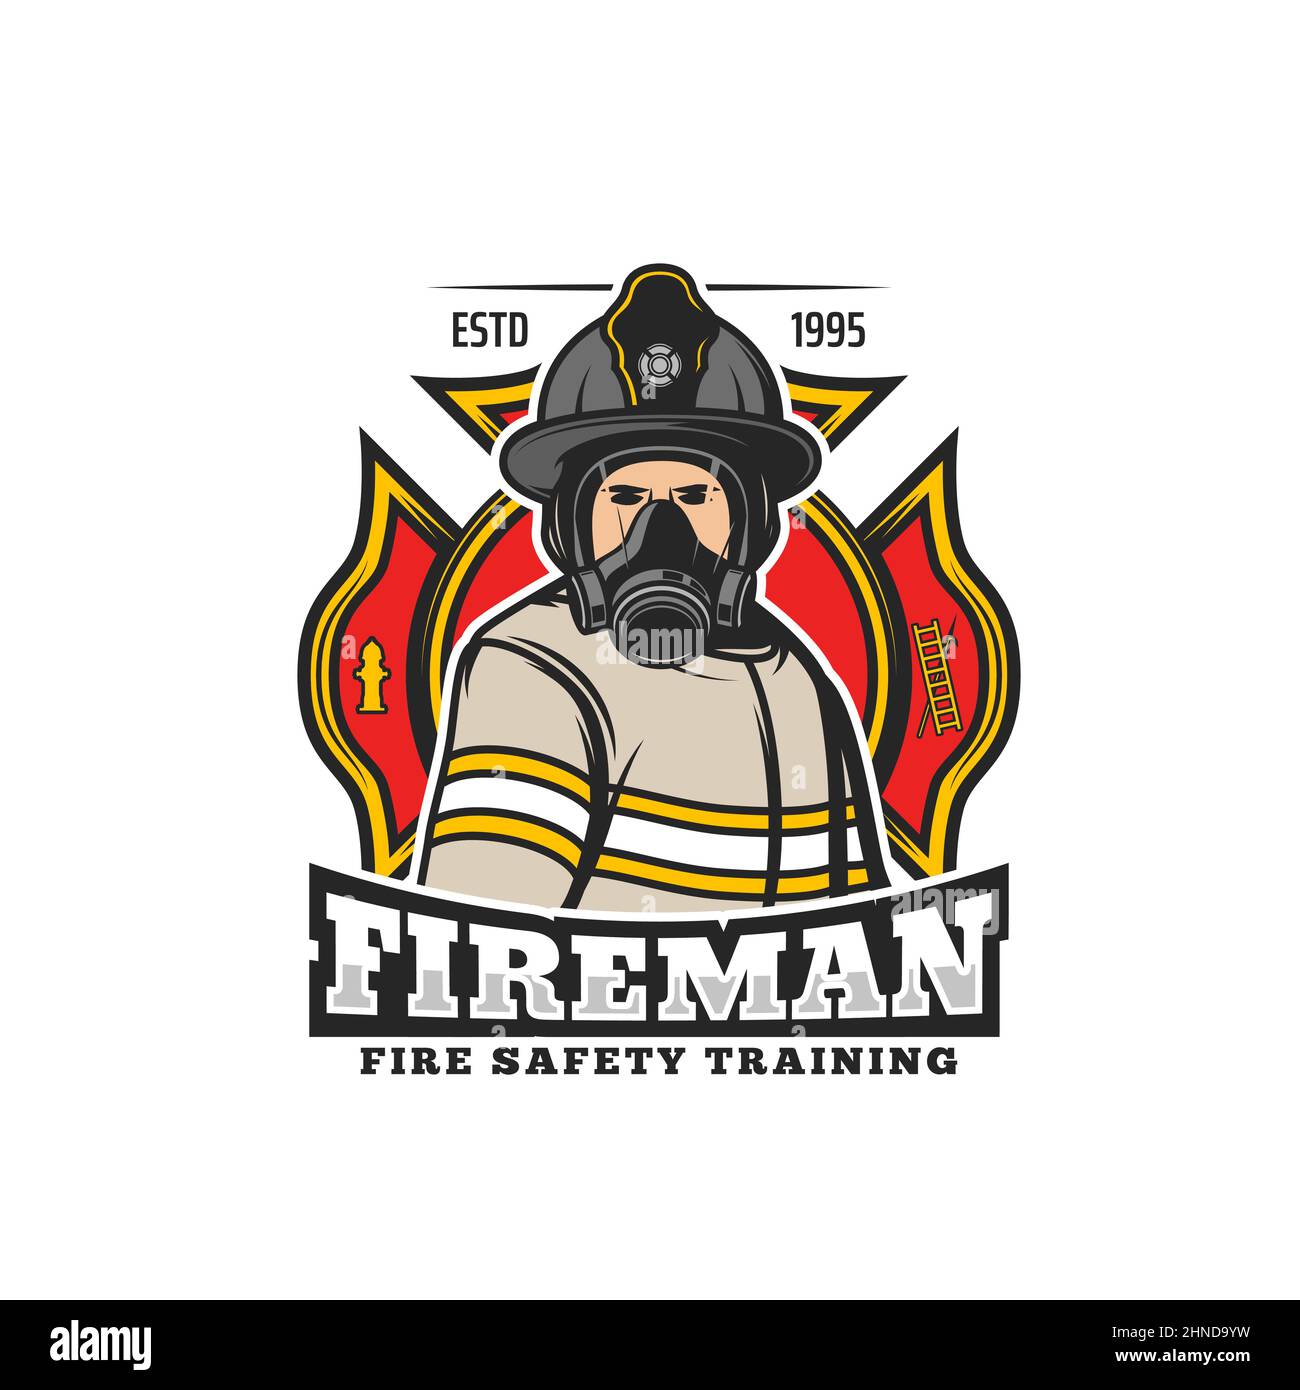 Fireman or firefighter retro icon. Fire department rescue team or brigade vector emblem, badge or icon with maltese cross, firefighter character in he Stock Vector